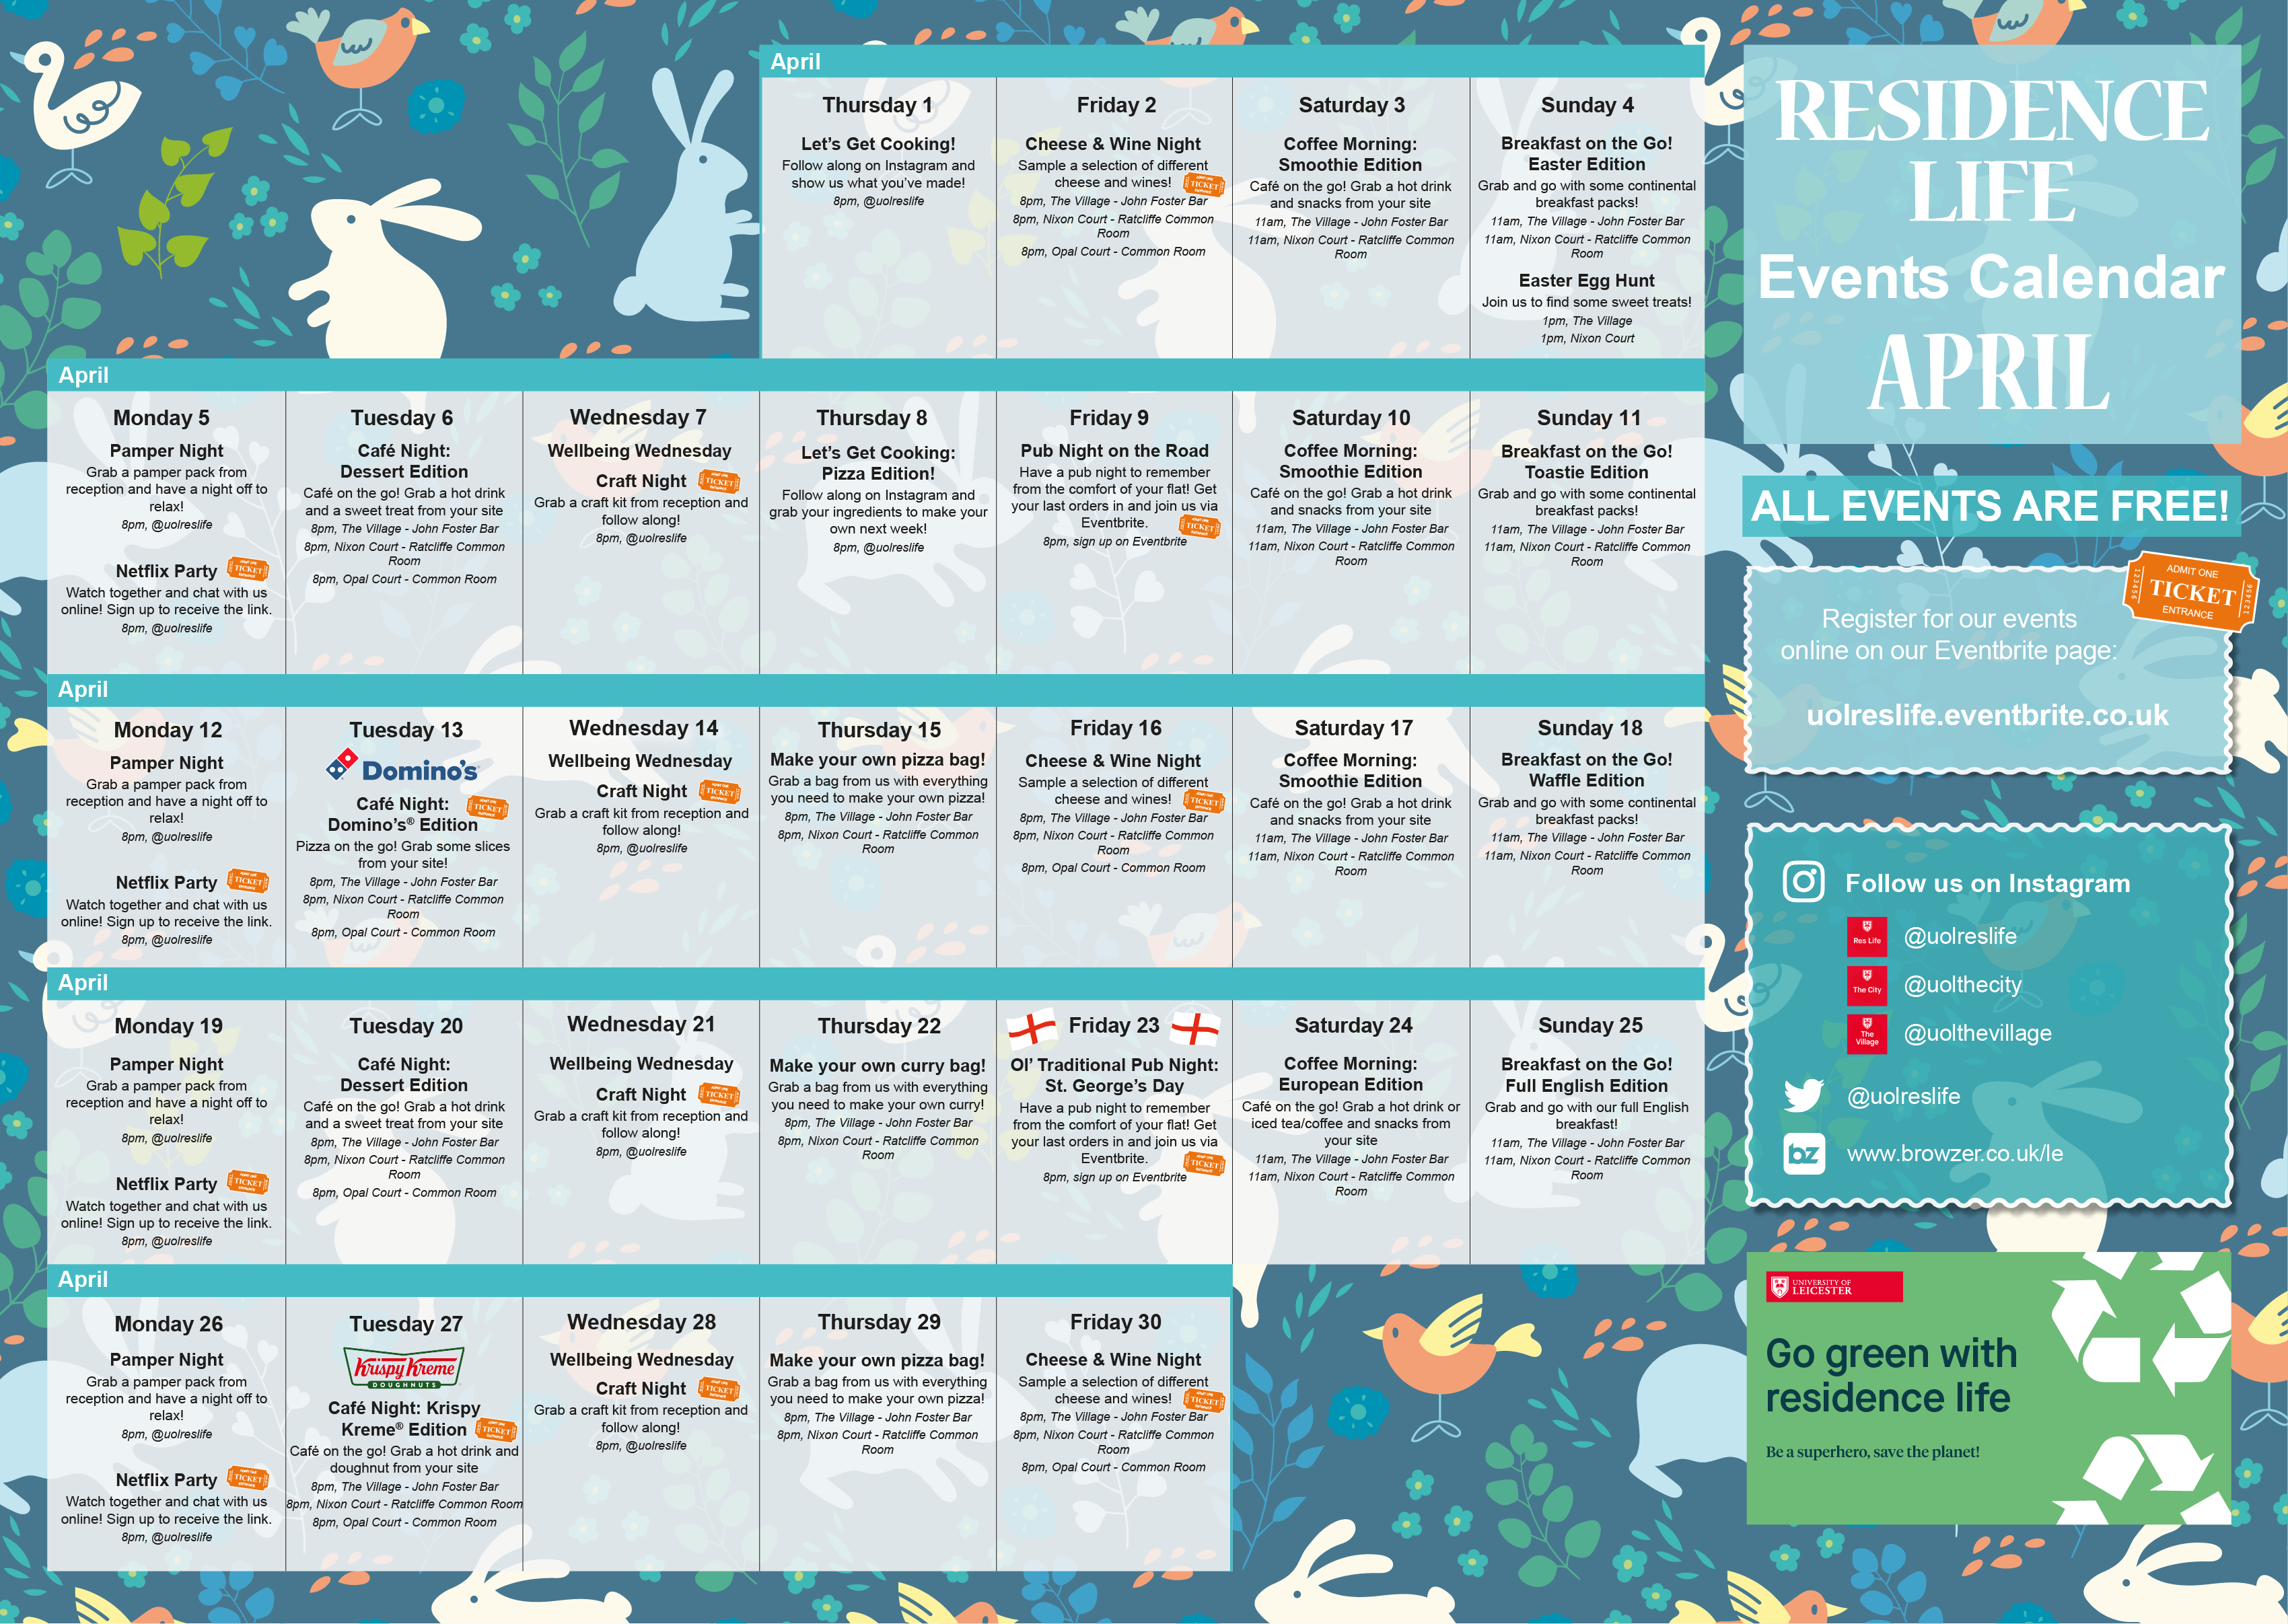 Browzer :: University of Leicester Residence Life Events Calendar